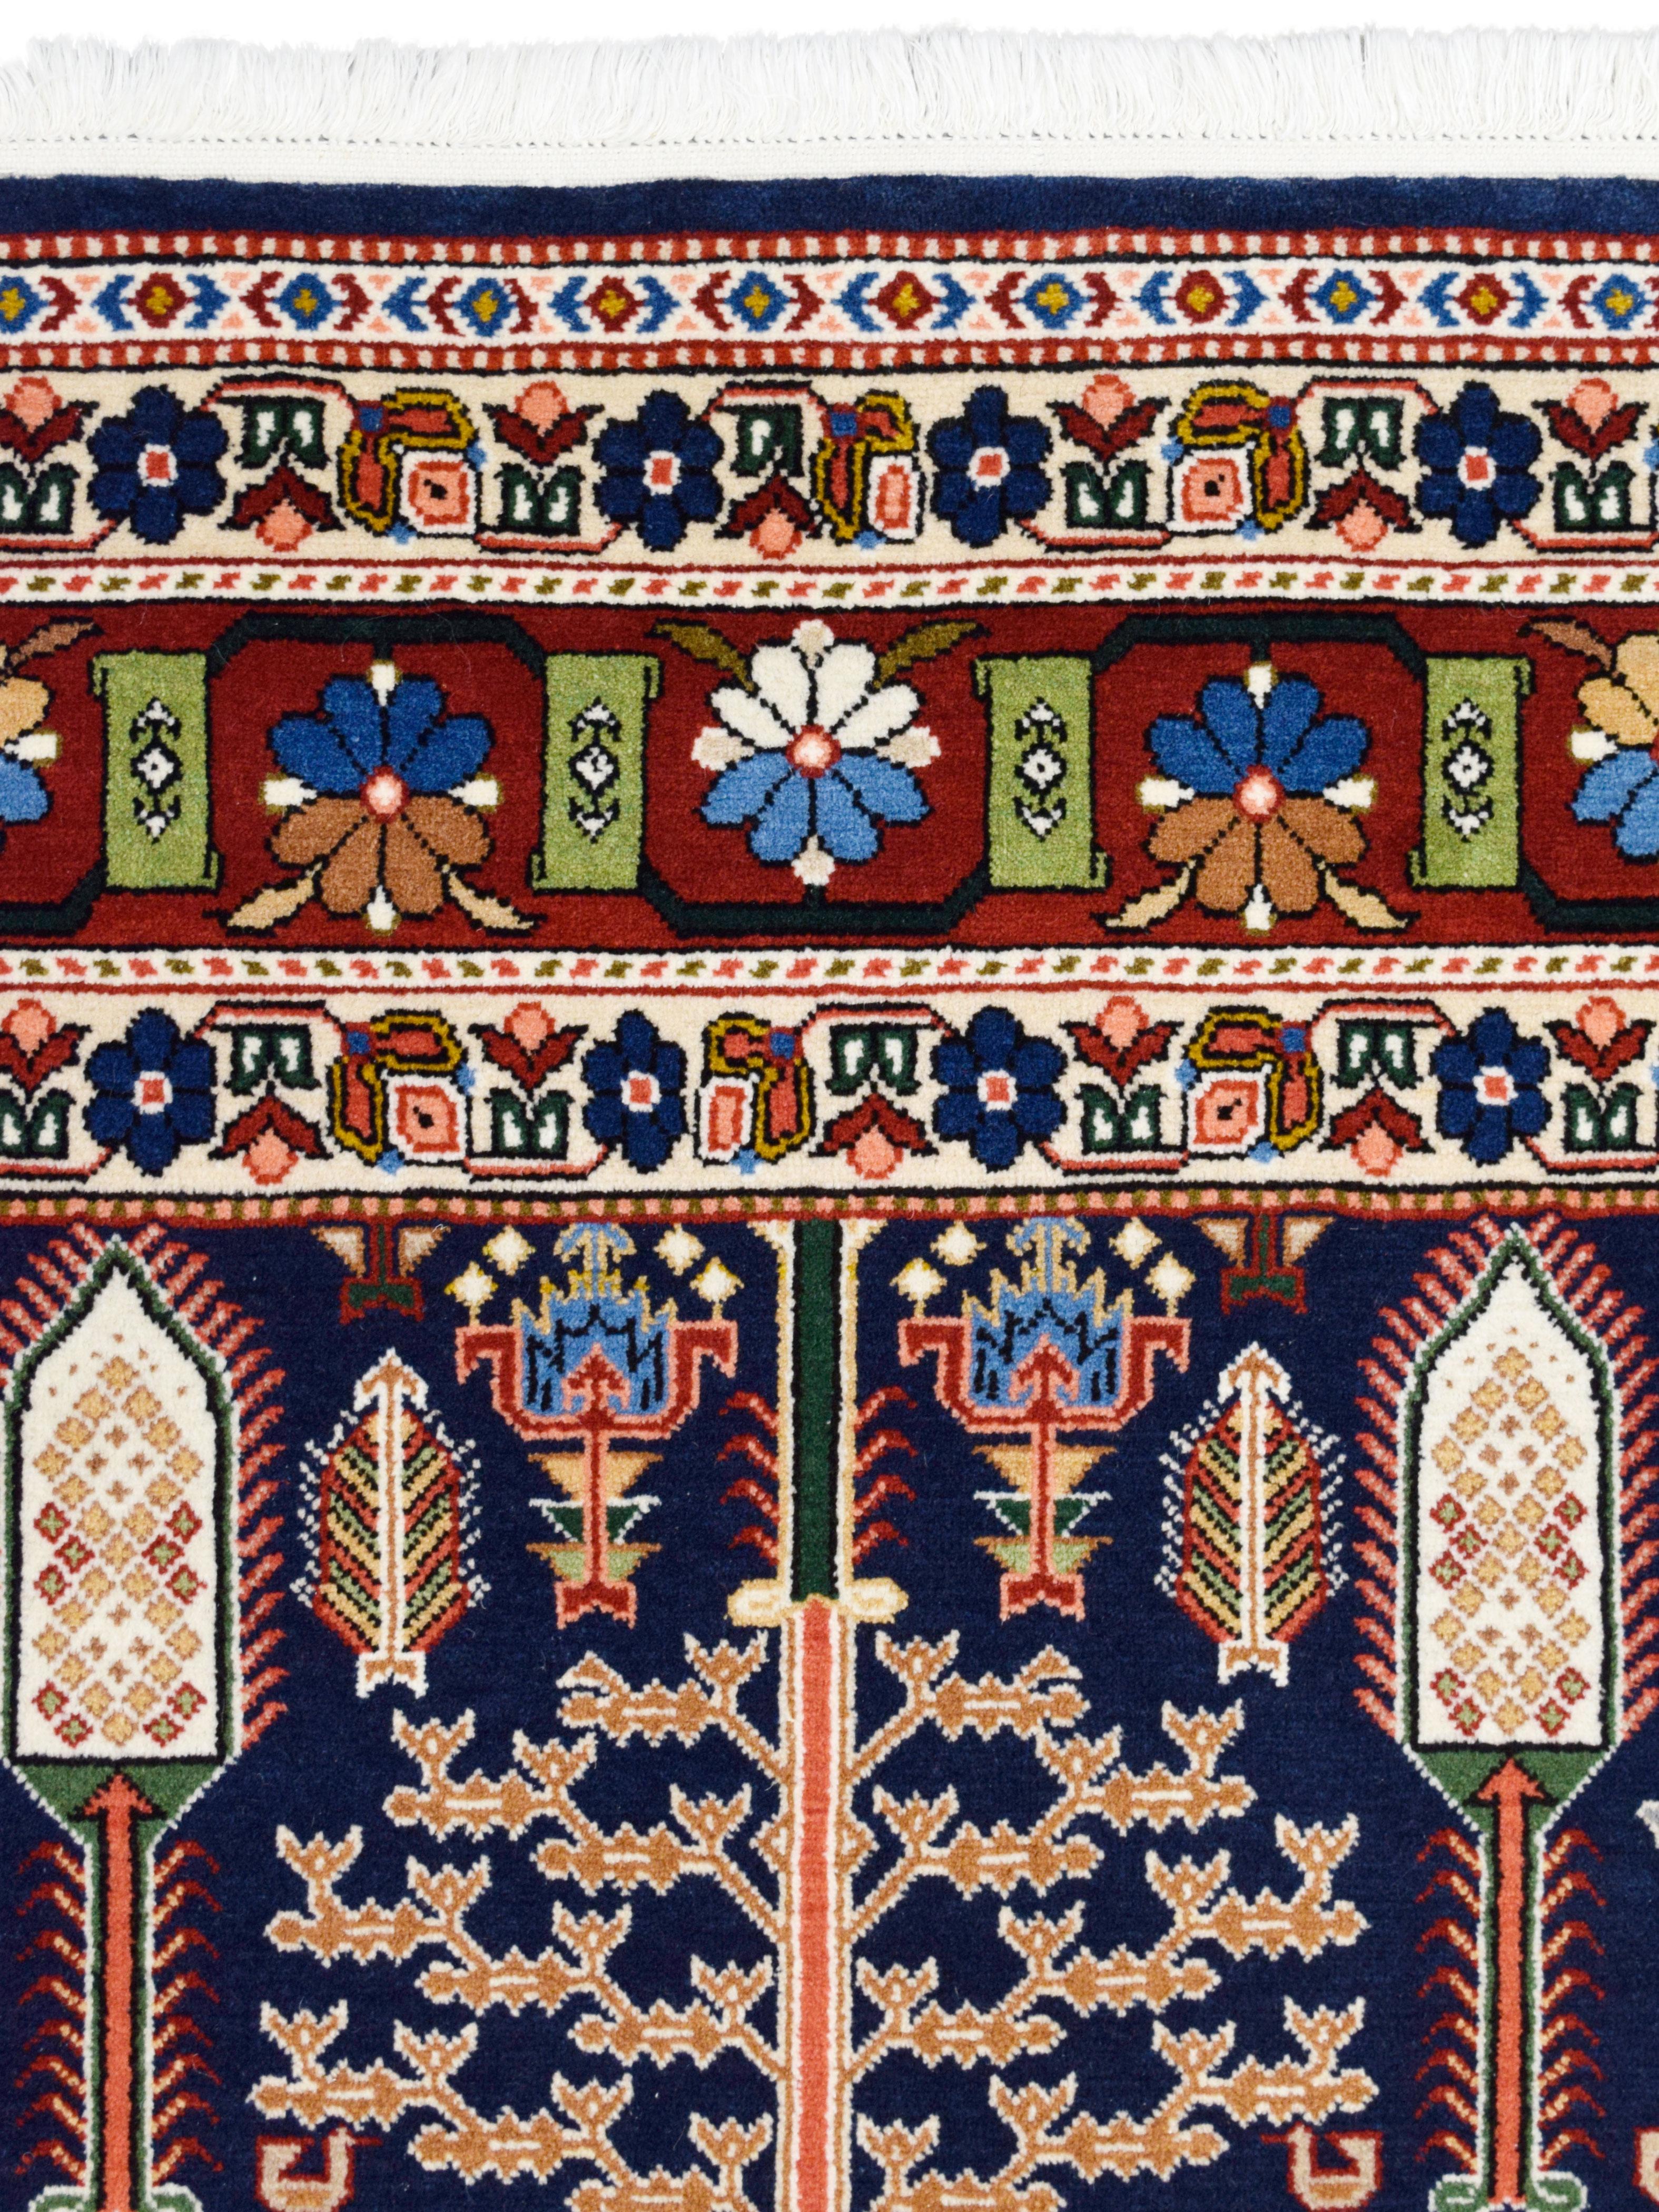 Measuring 5’5” x 8’3”, this colorful Tree-of-Life Bakhtiari carpet is hand-knotted in blue, red, green, pink, and taupe wool and illustrates a tribal-inspired garden design. Unique compared to traditional Persian Bakhtiari carpets, this piece